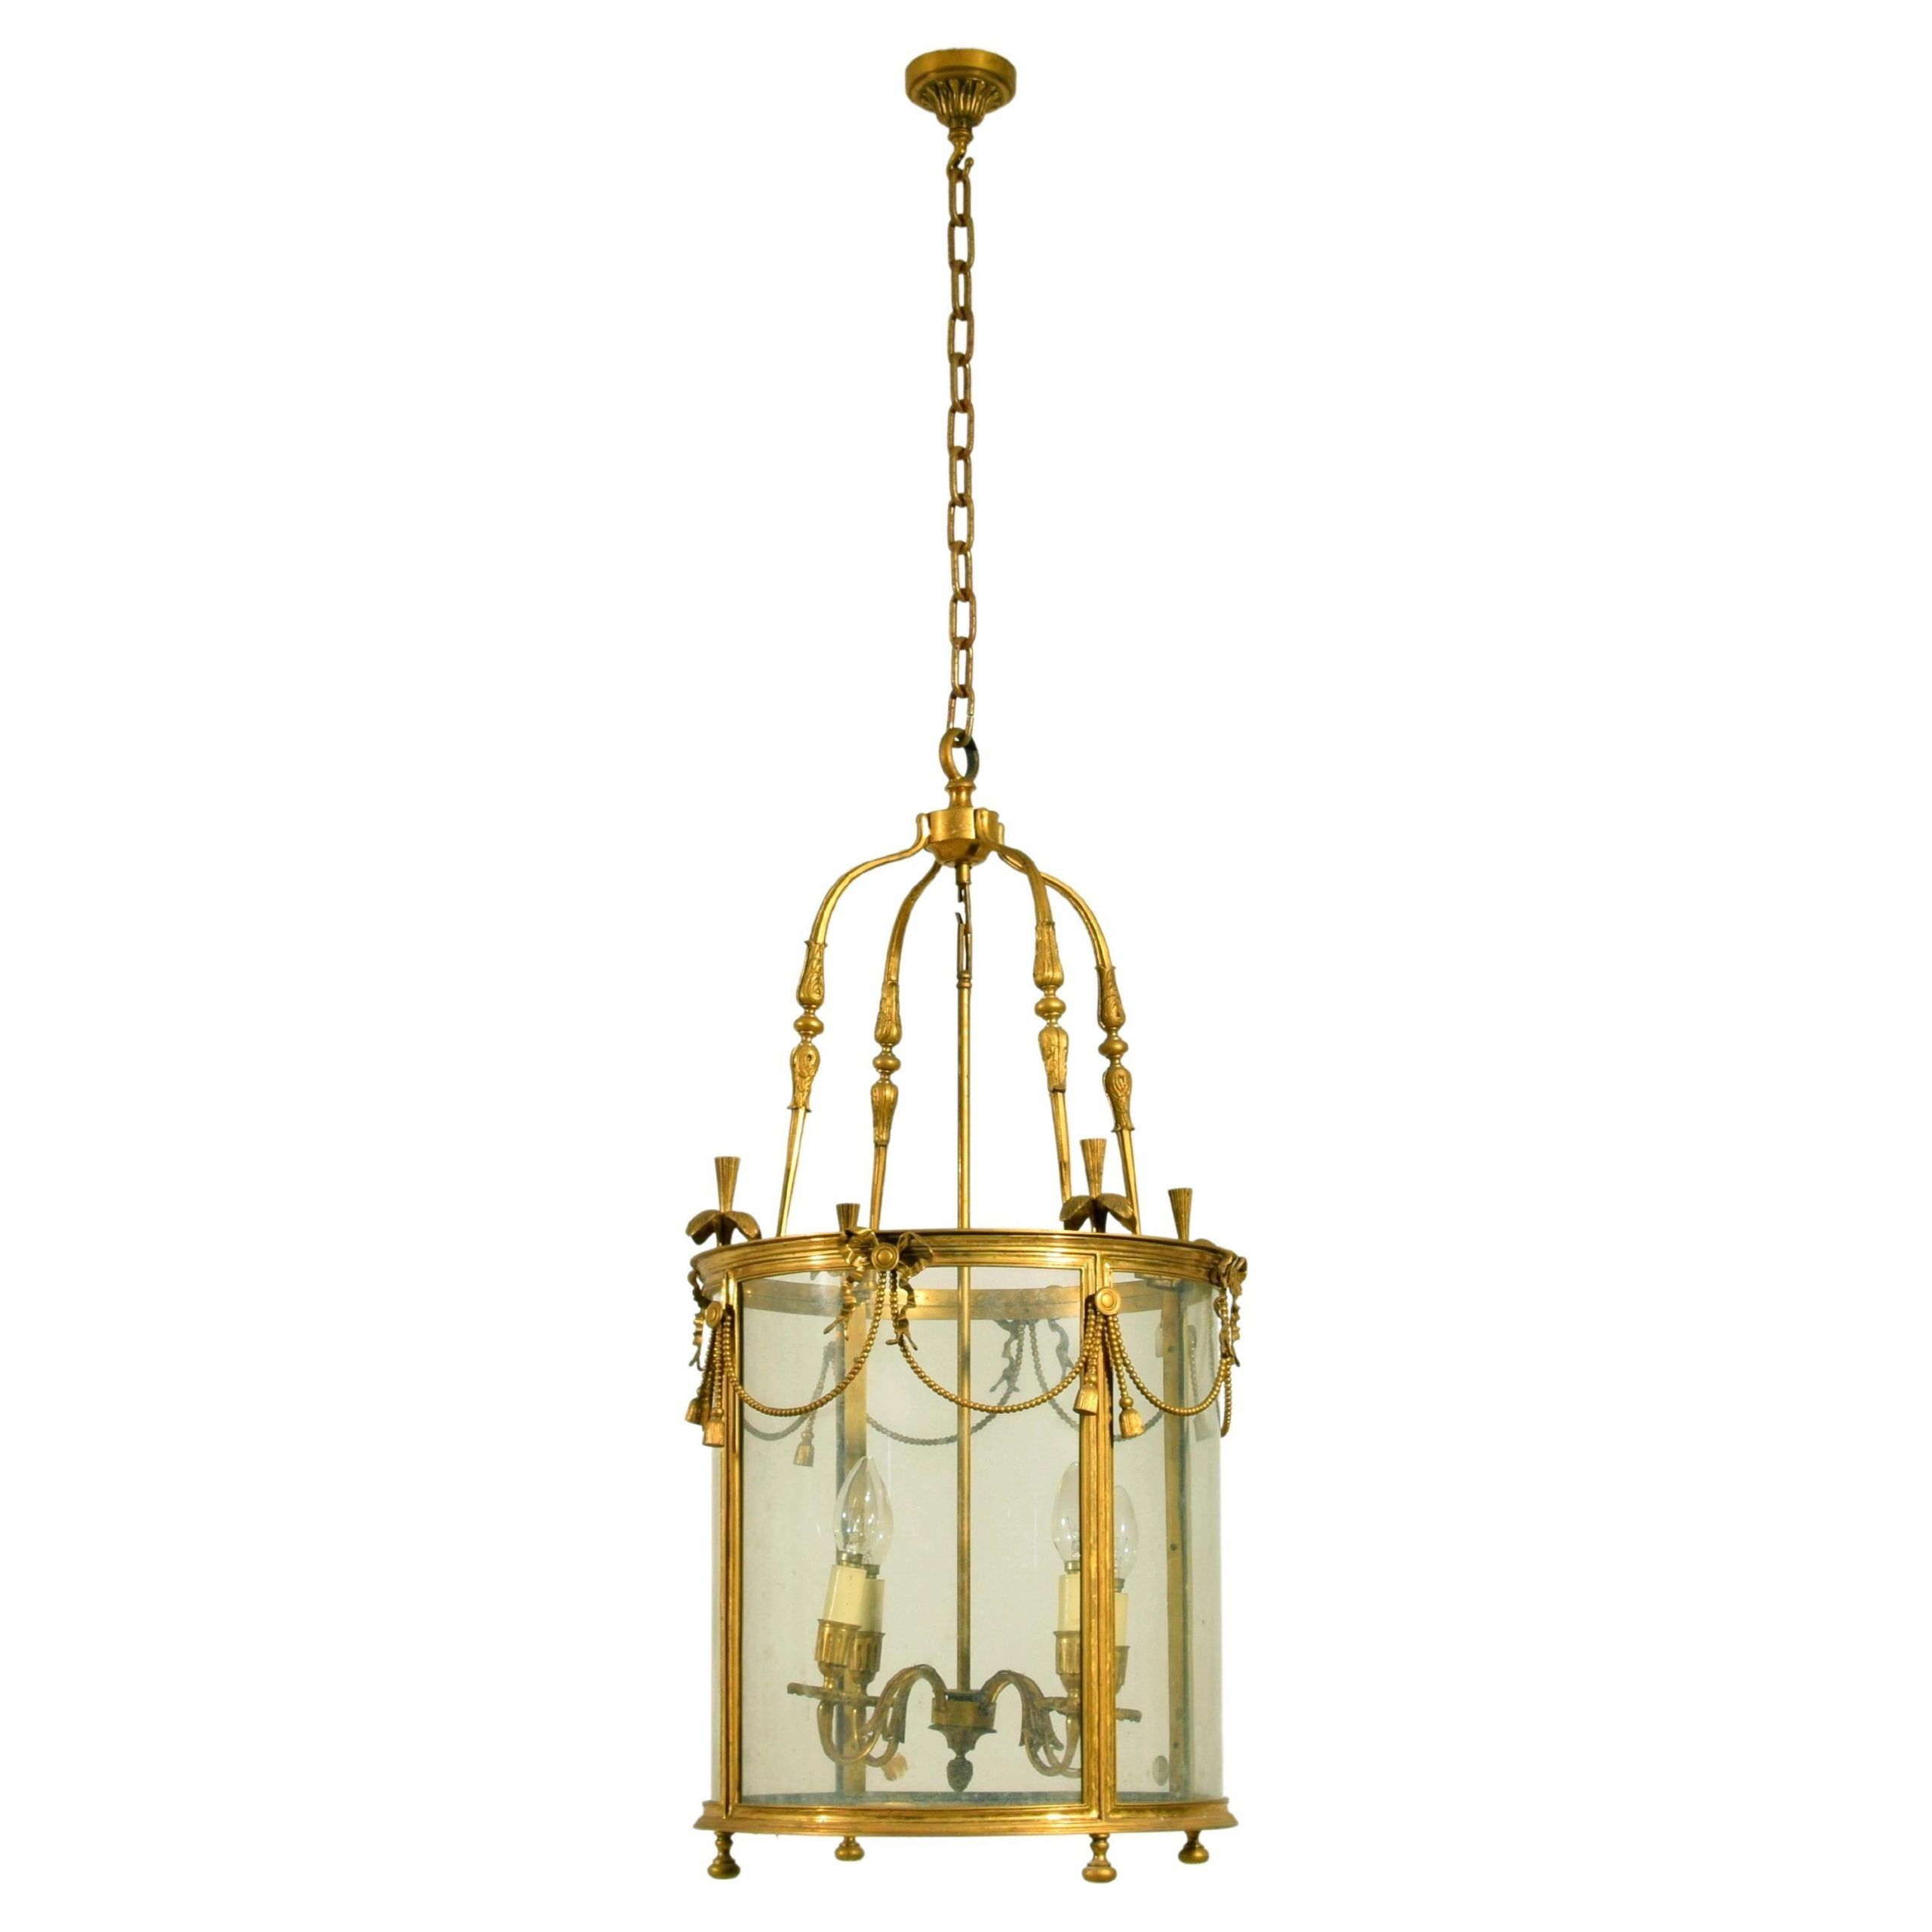 20th Century, French Gilt Bronze Four Lights Lantern Chandelier For Sale At  1stdibs Within Four Light Lantern Chandeliers (View 11 of 15)